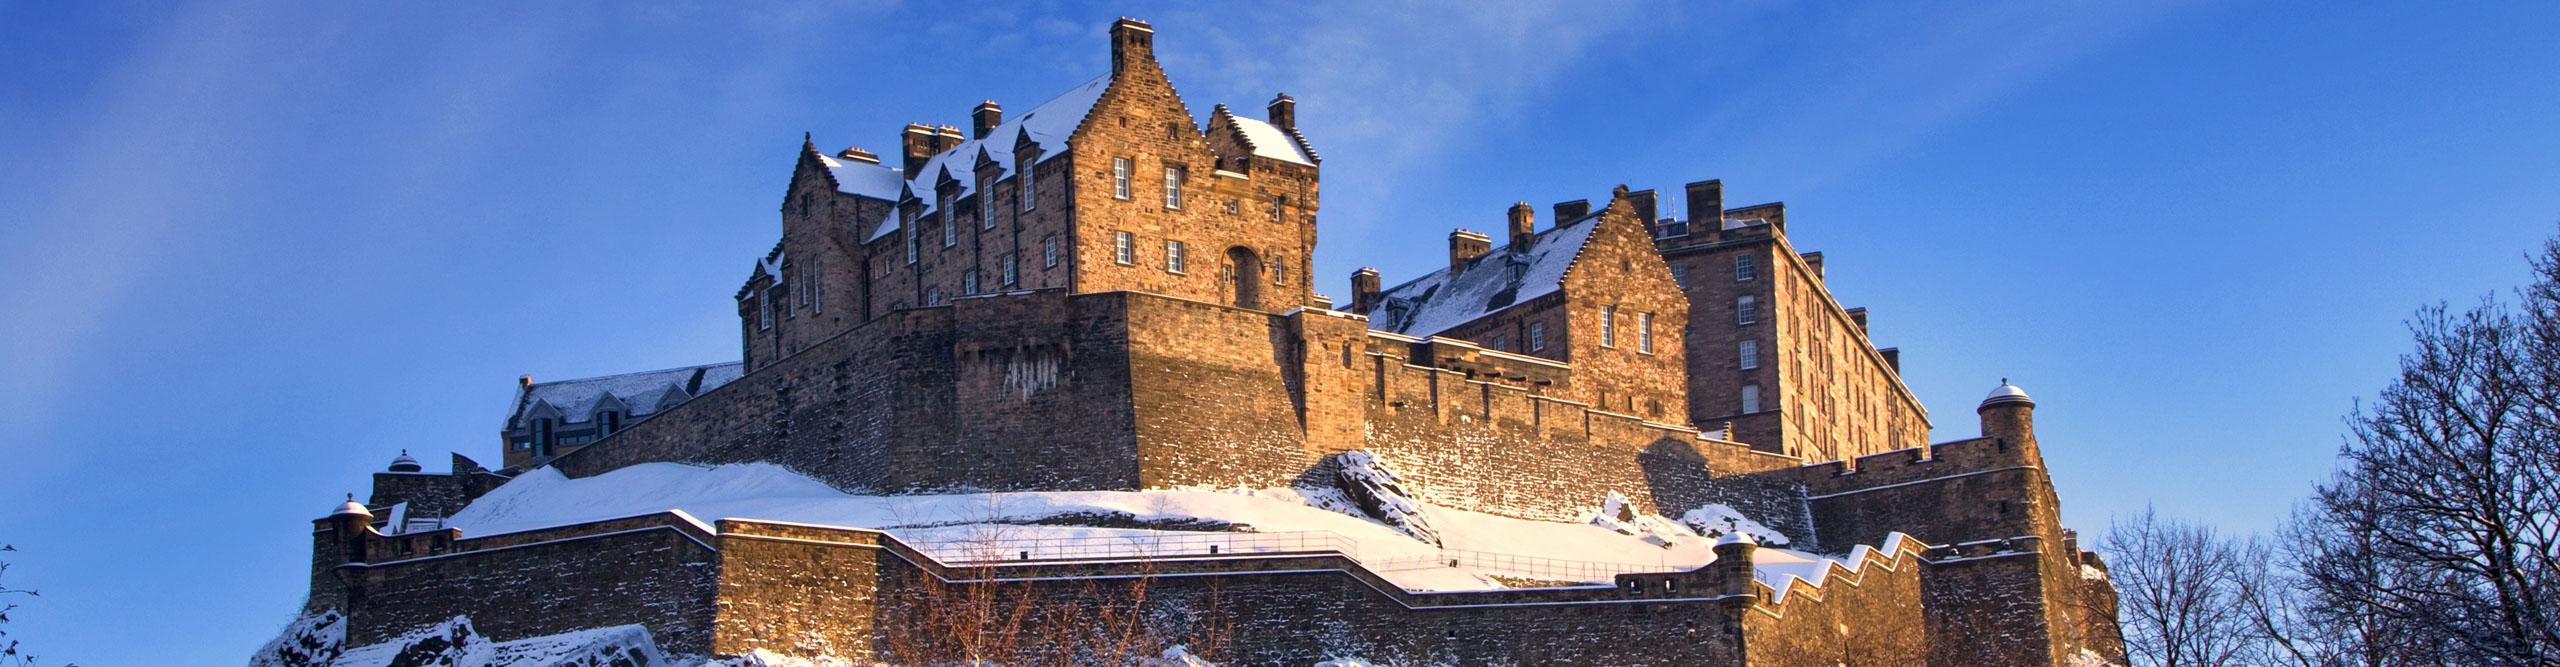 Edinburgh castle dusted with snow glows in the late afternoon winter sunset, with bright blue skies